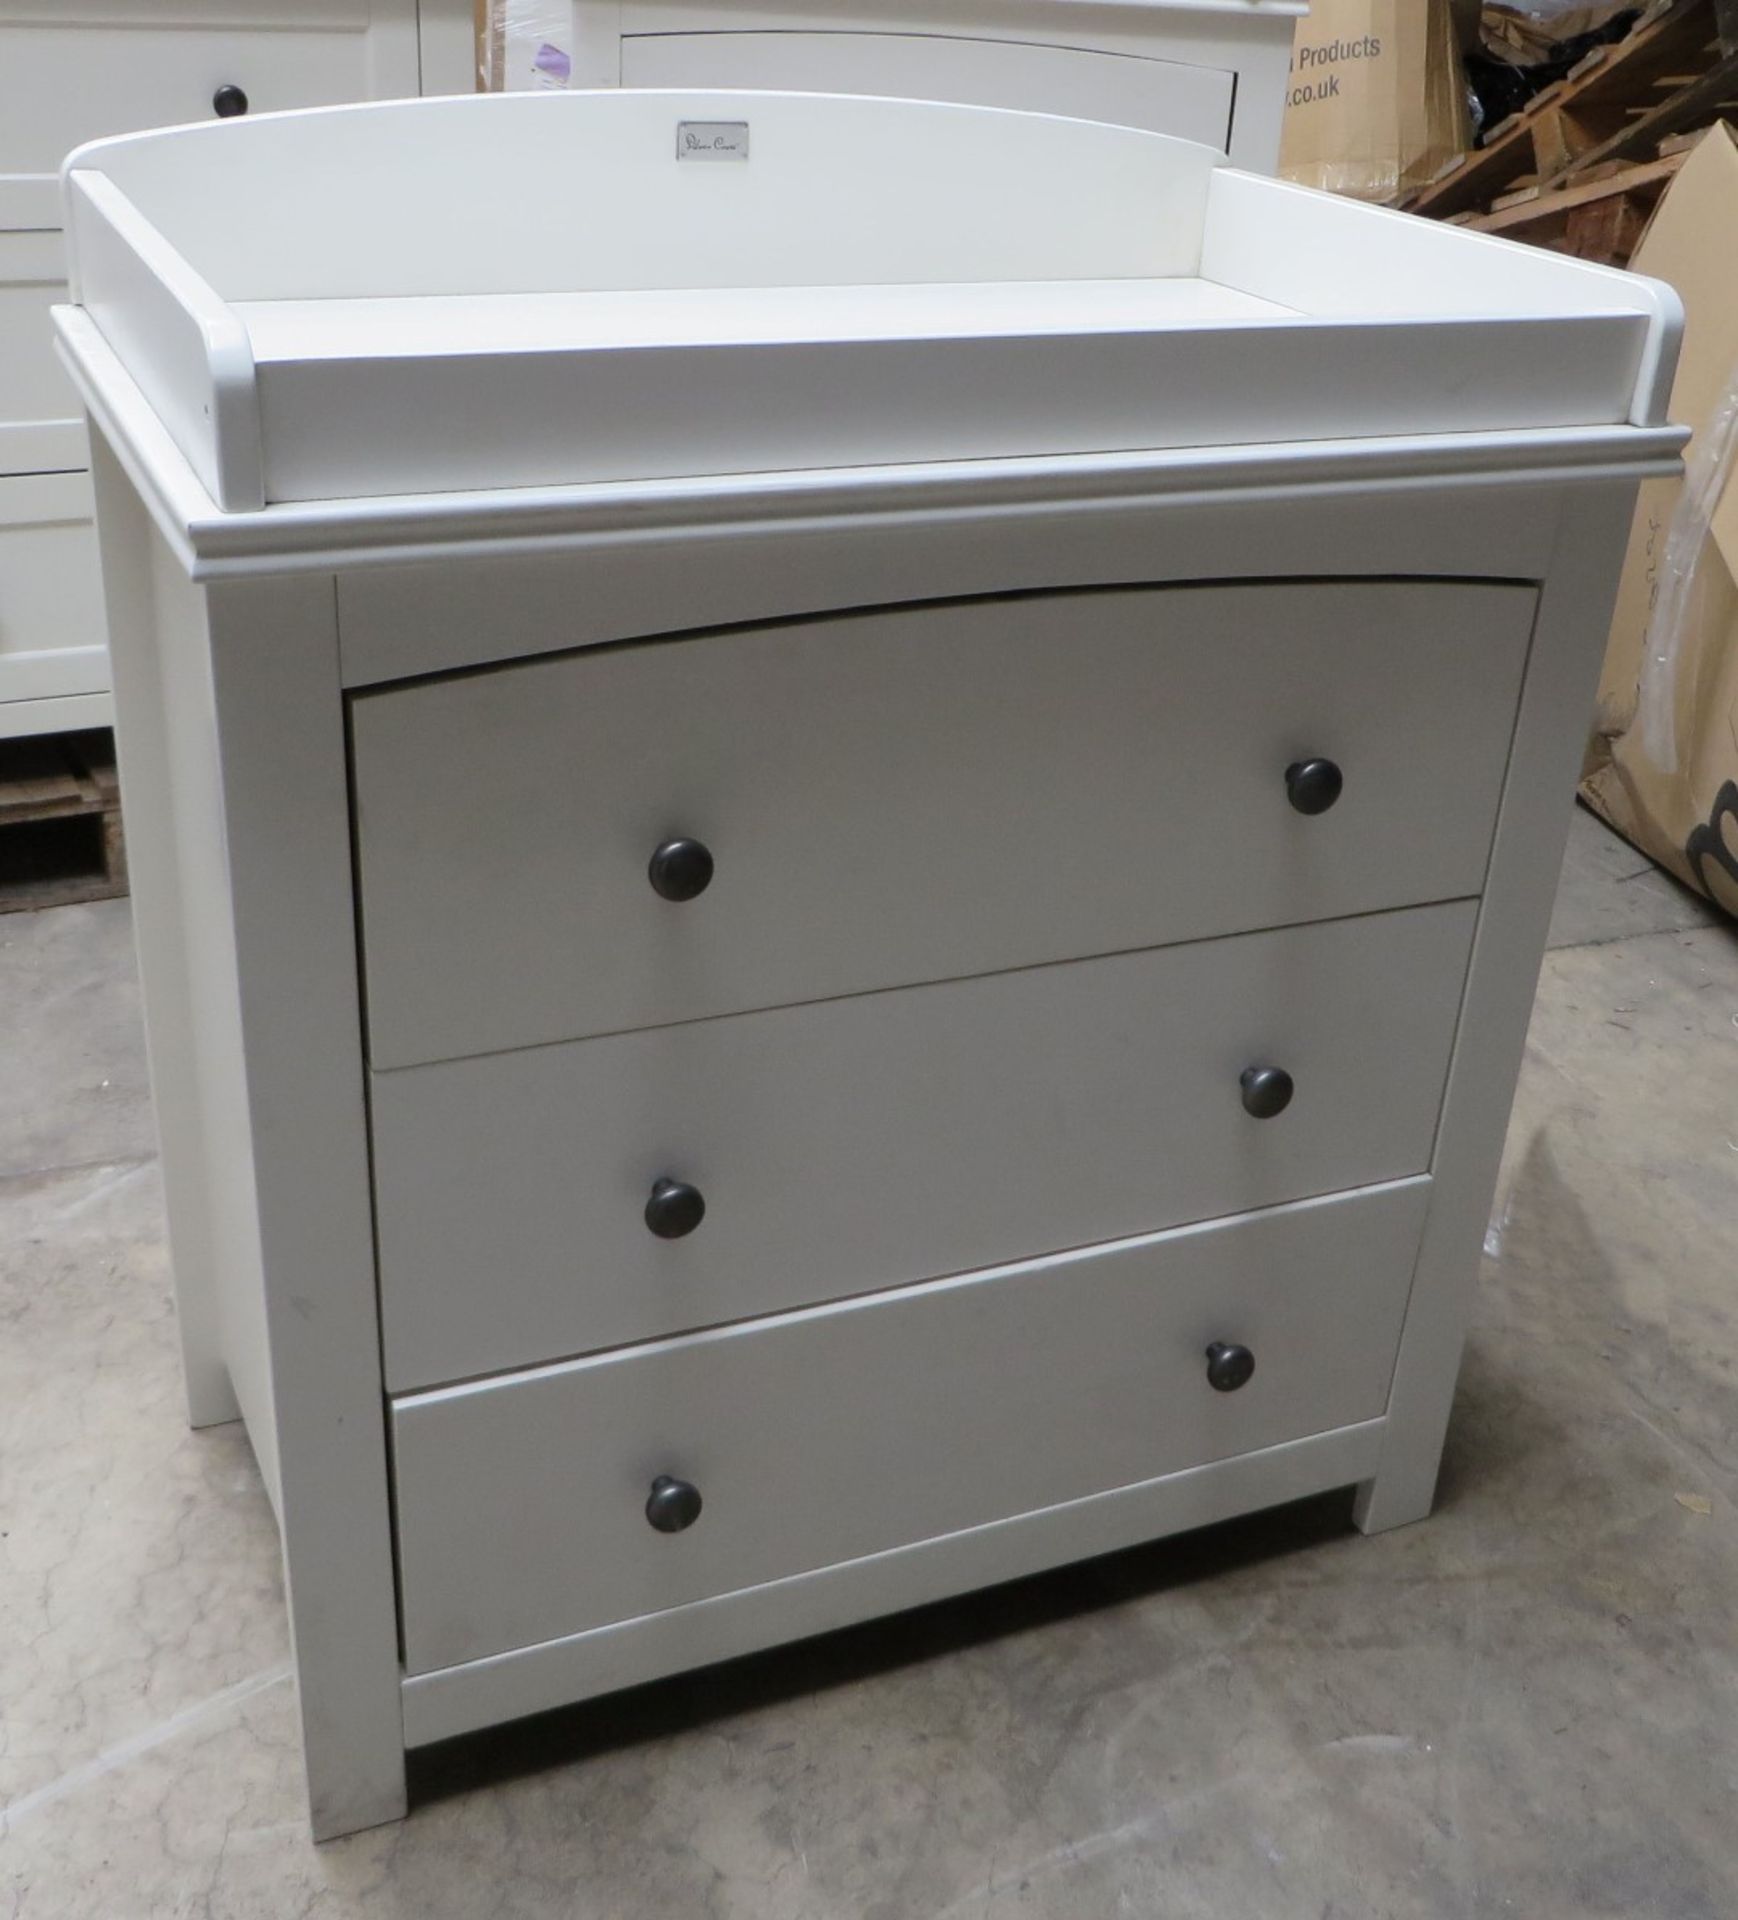 1 x Silver Cross Ashby-Style Combination Changer And Dresser - Nursery Furniture - 88x52x97.5cm - - Image 3 of 19